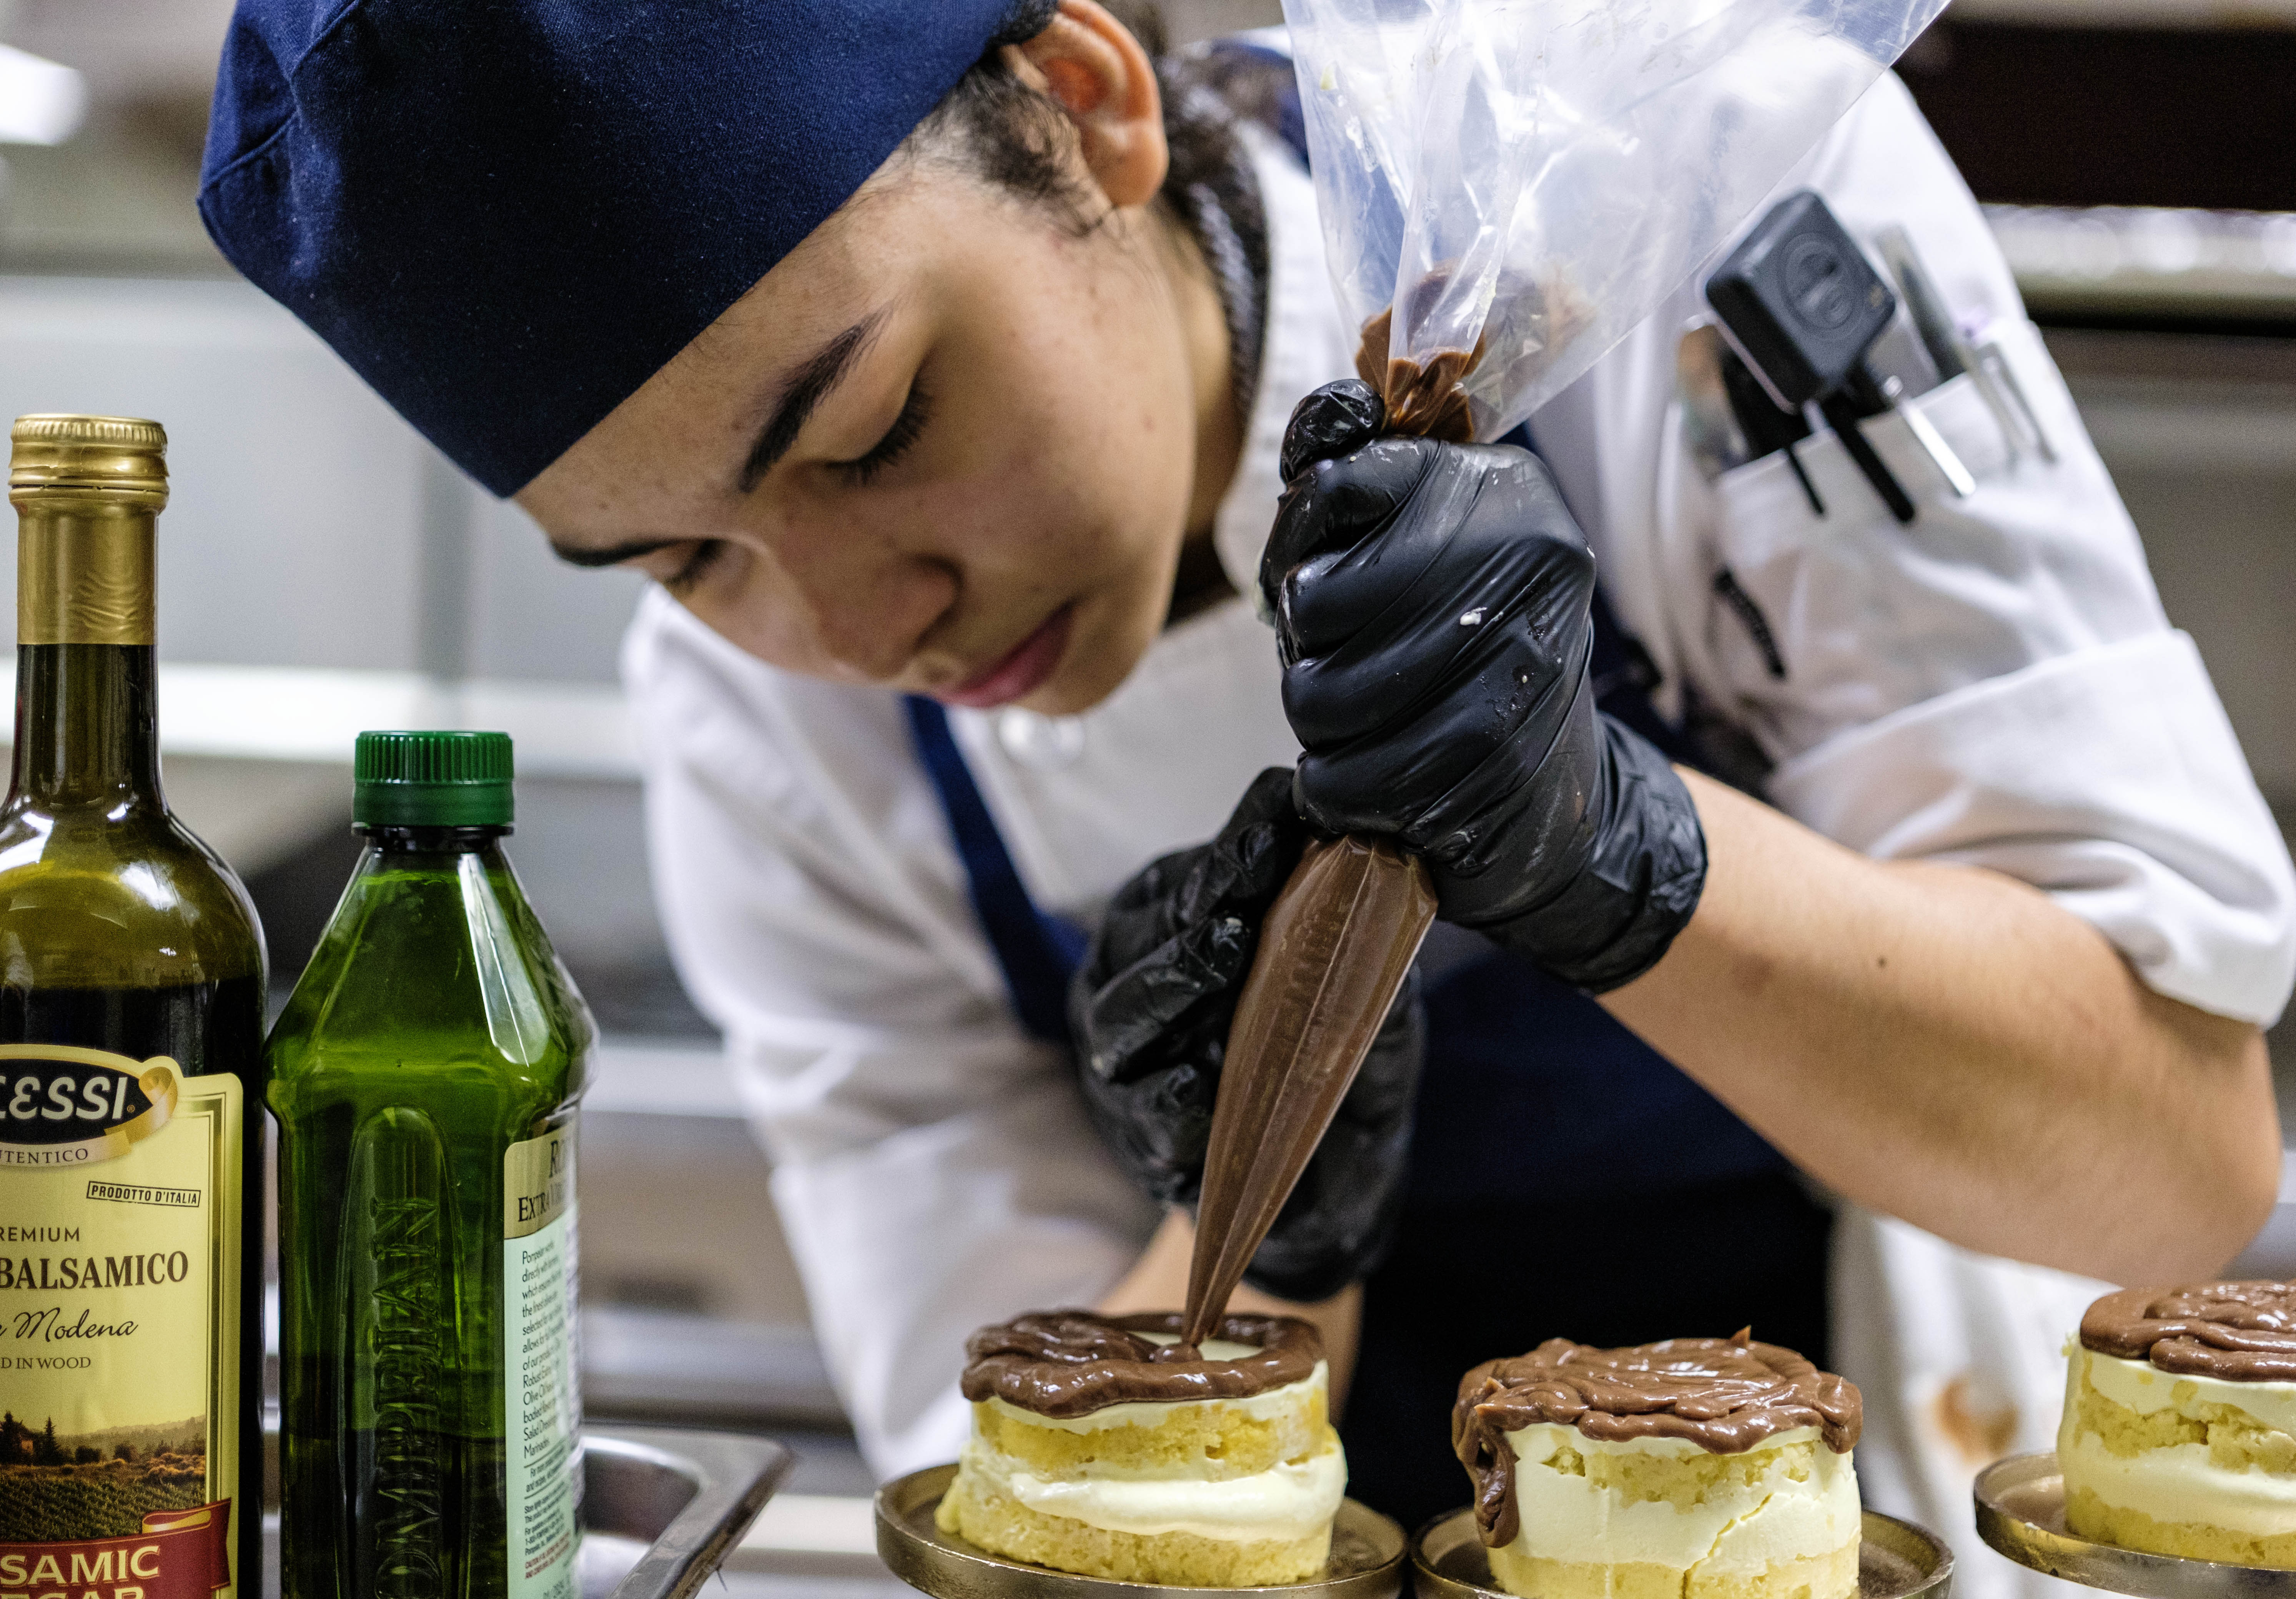 Culinary Arts student decorates a pastry